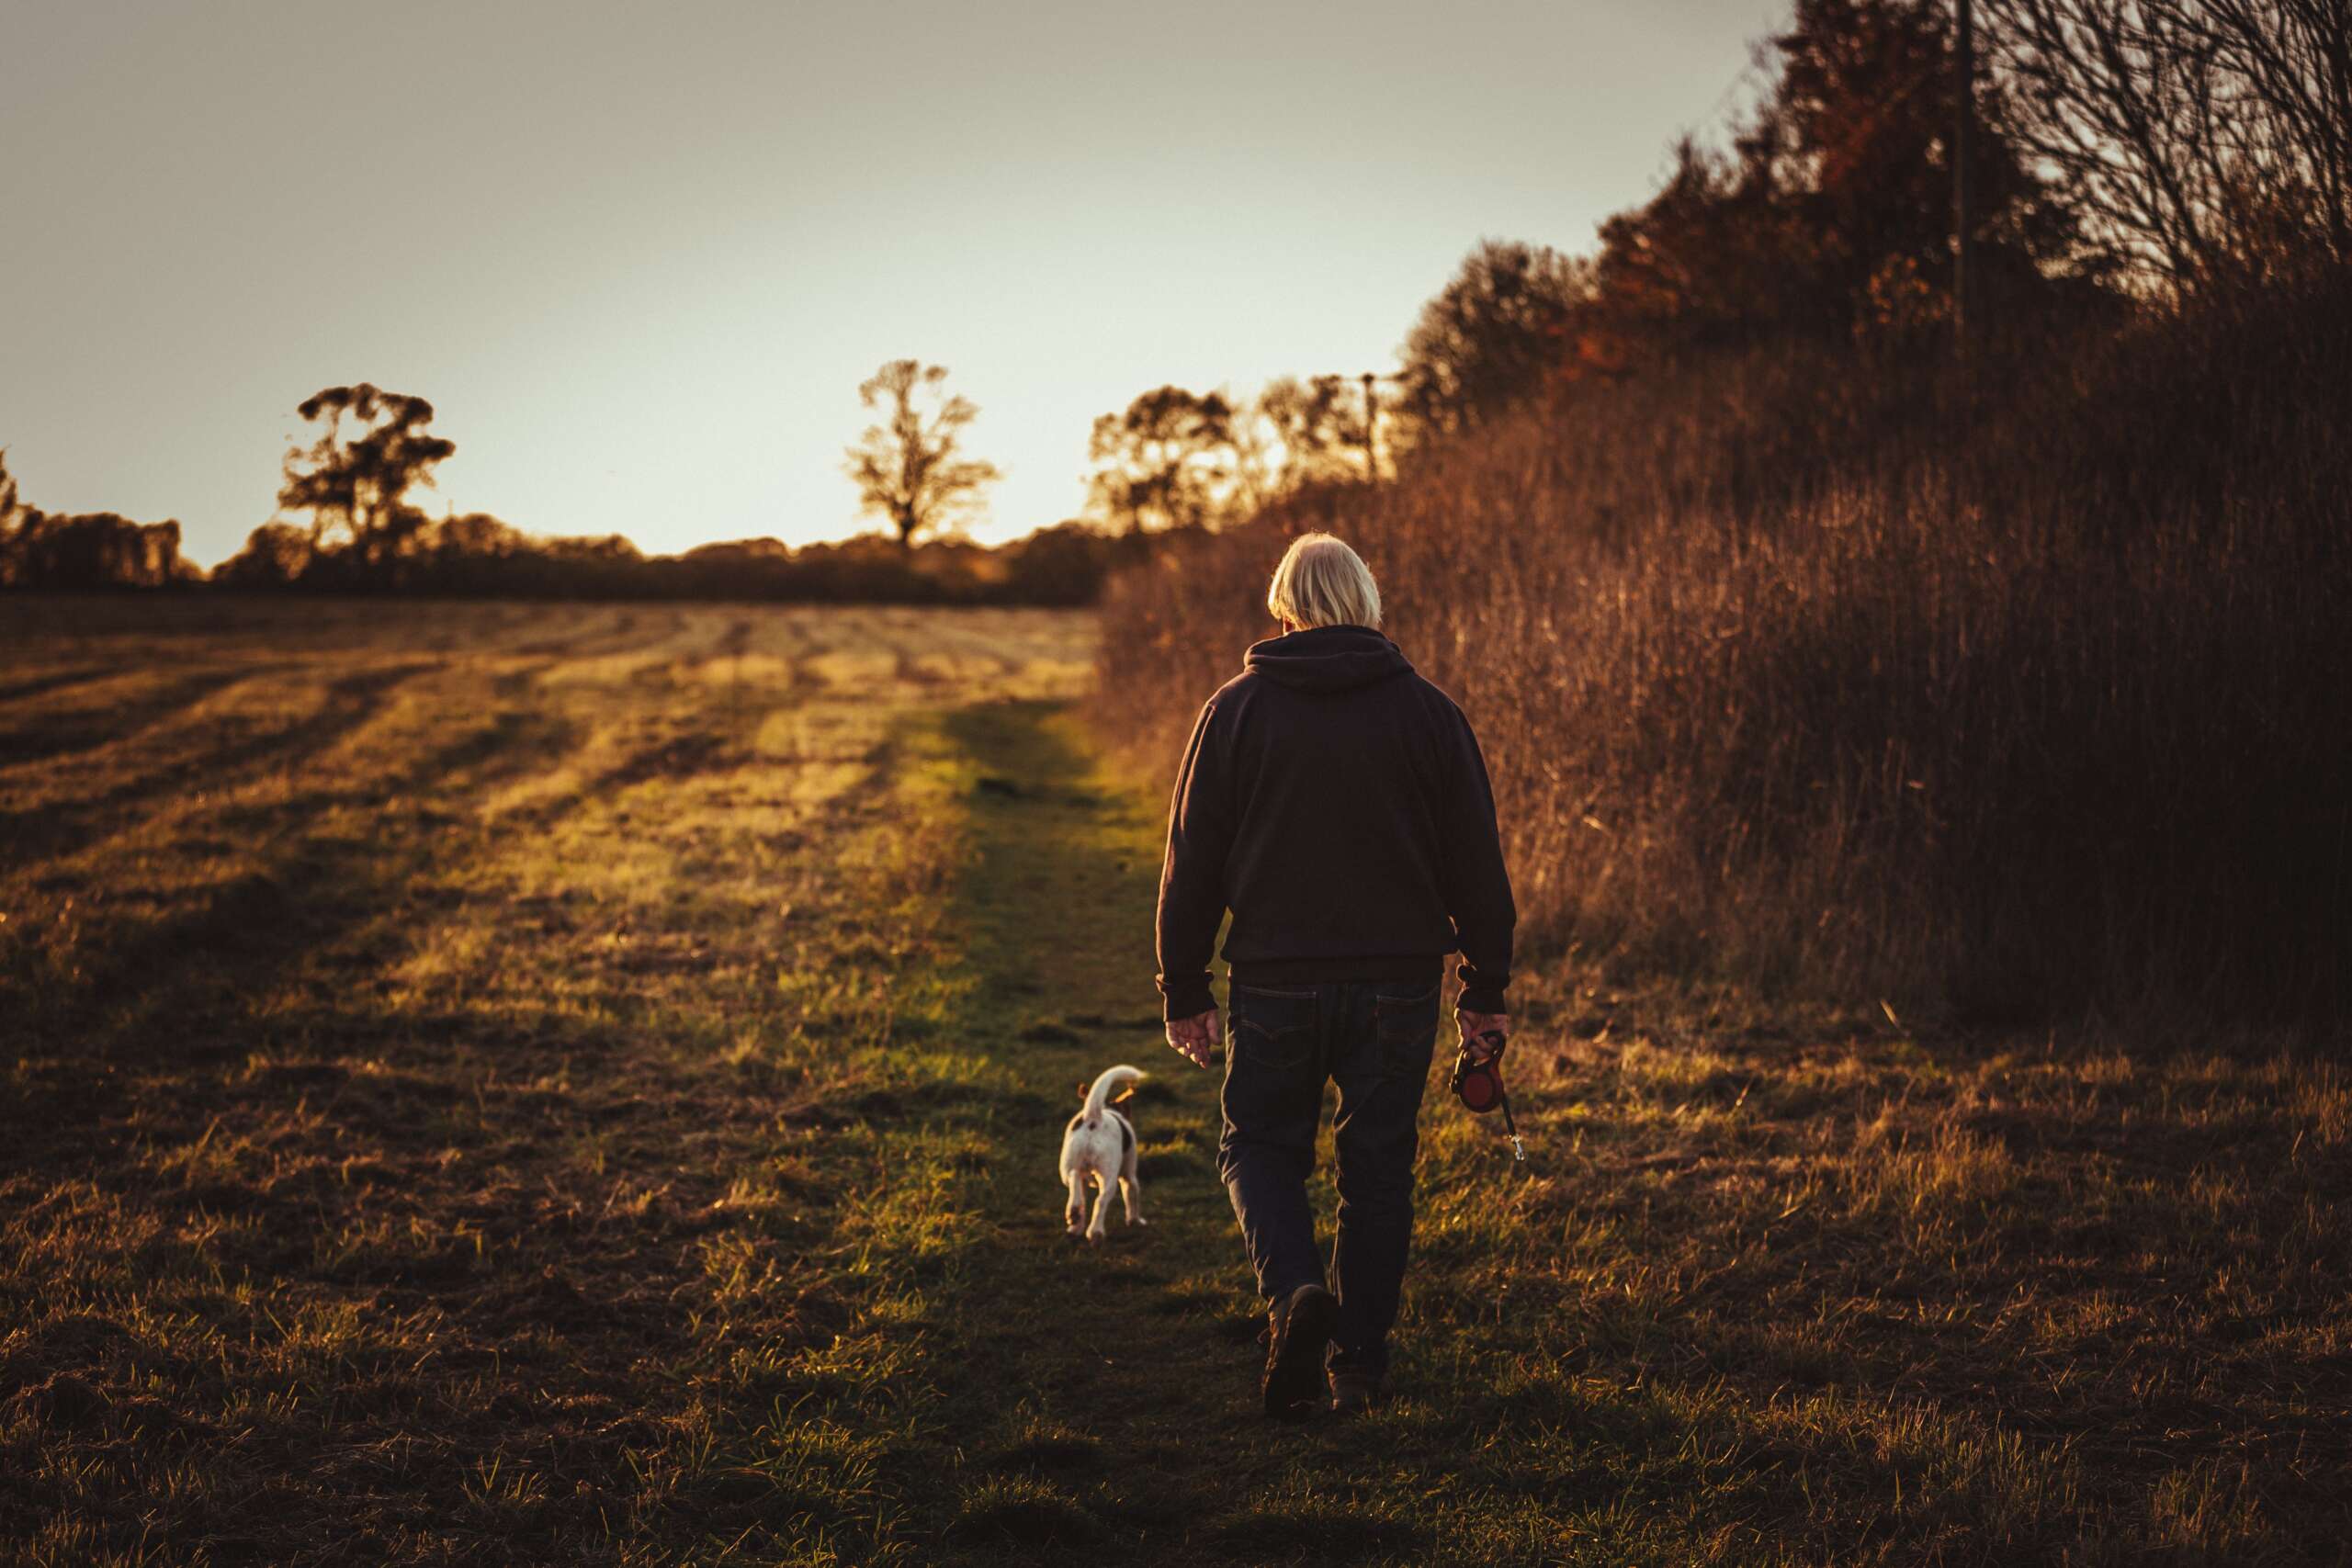 what are the benefits of walking your dog